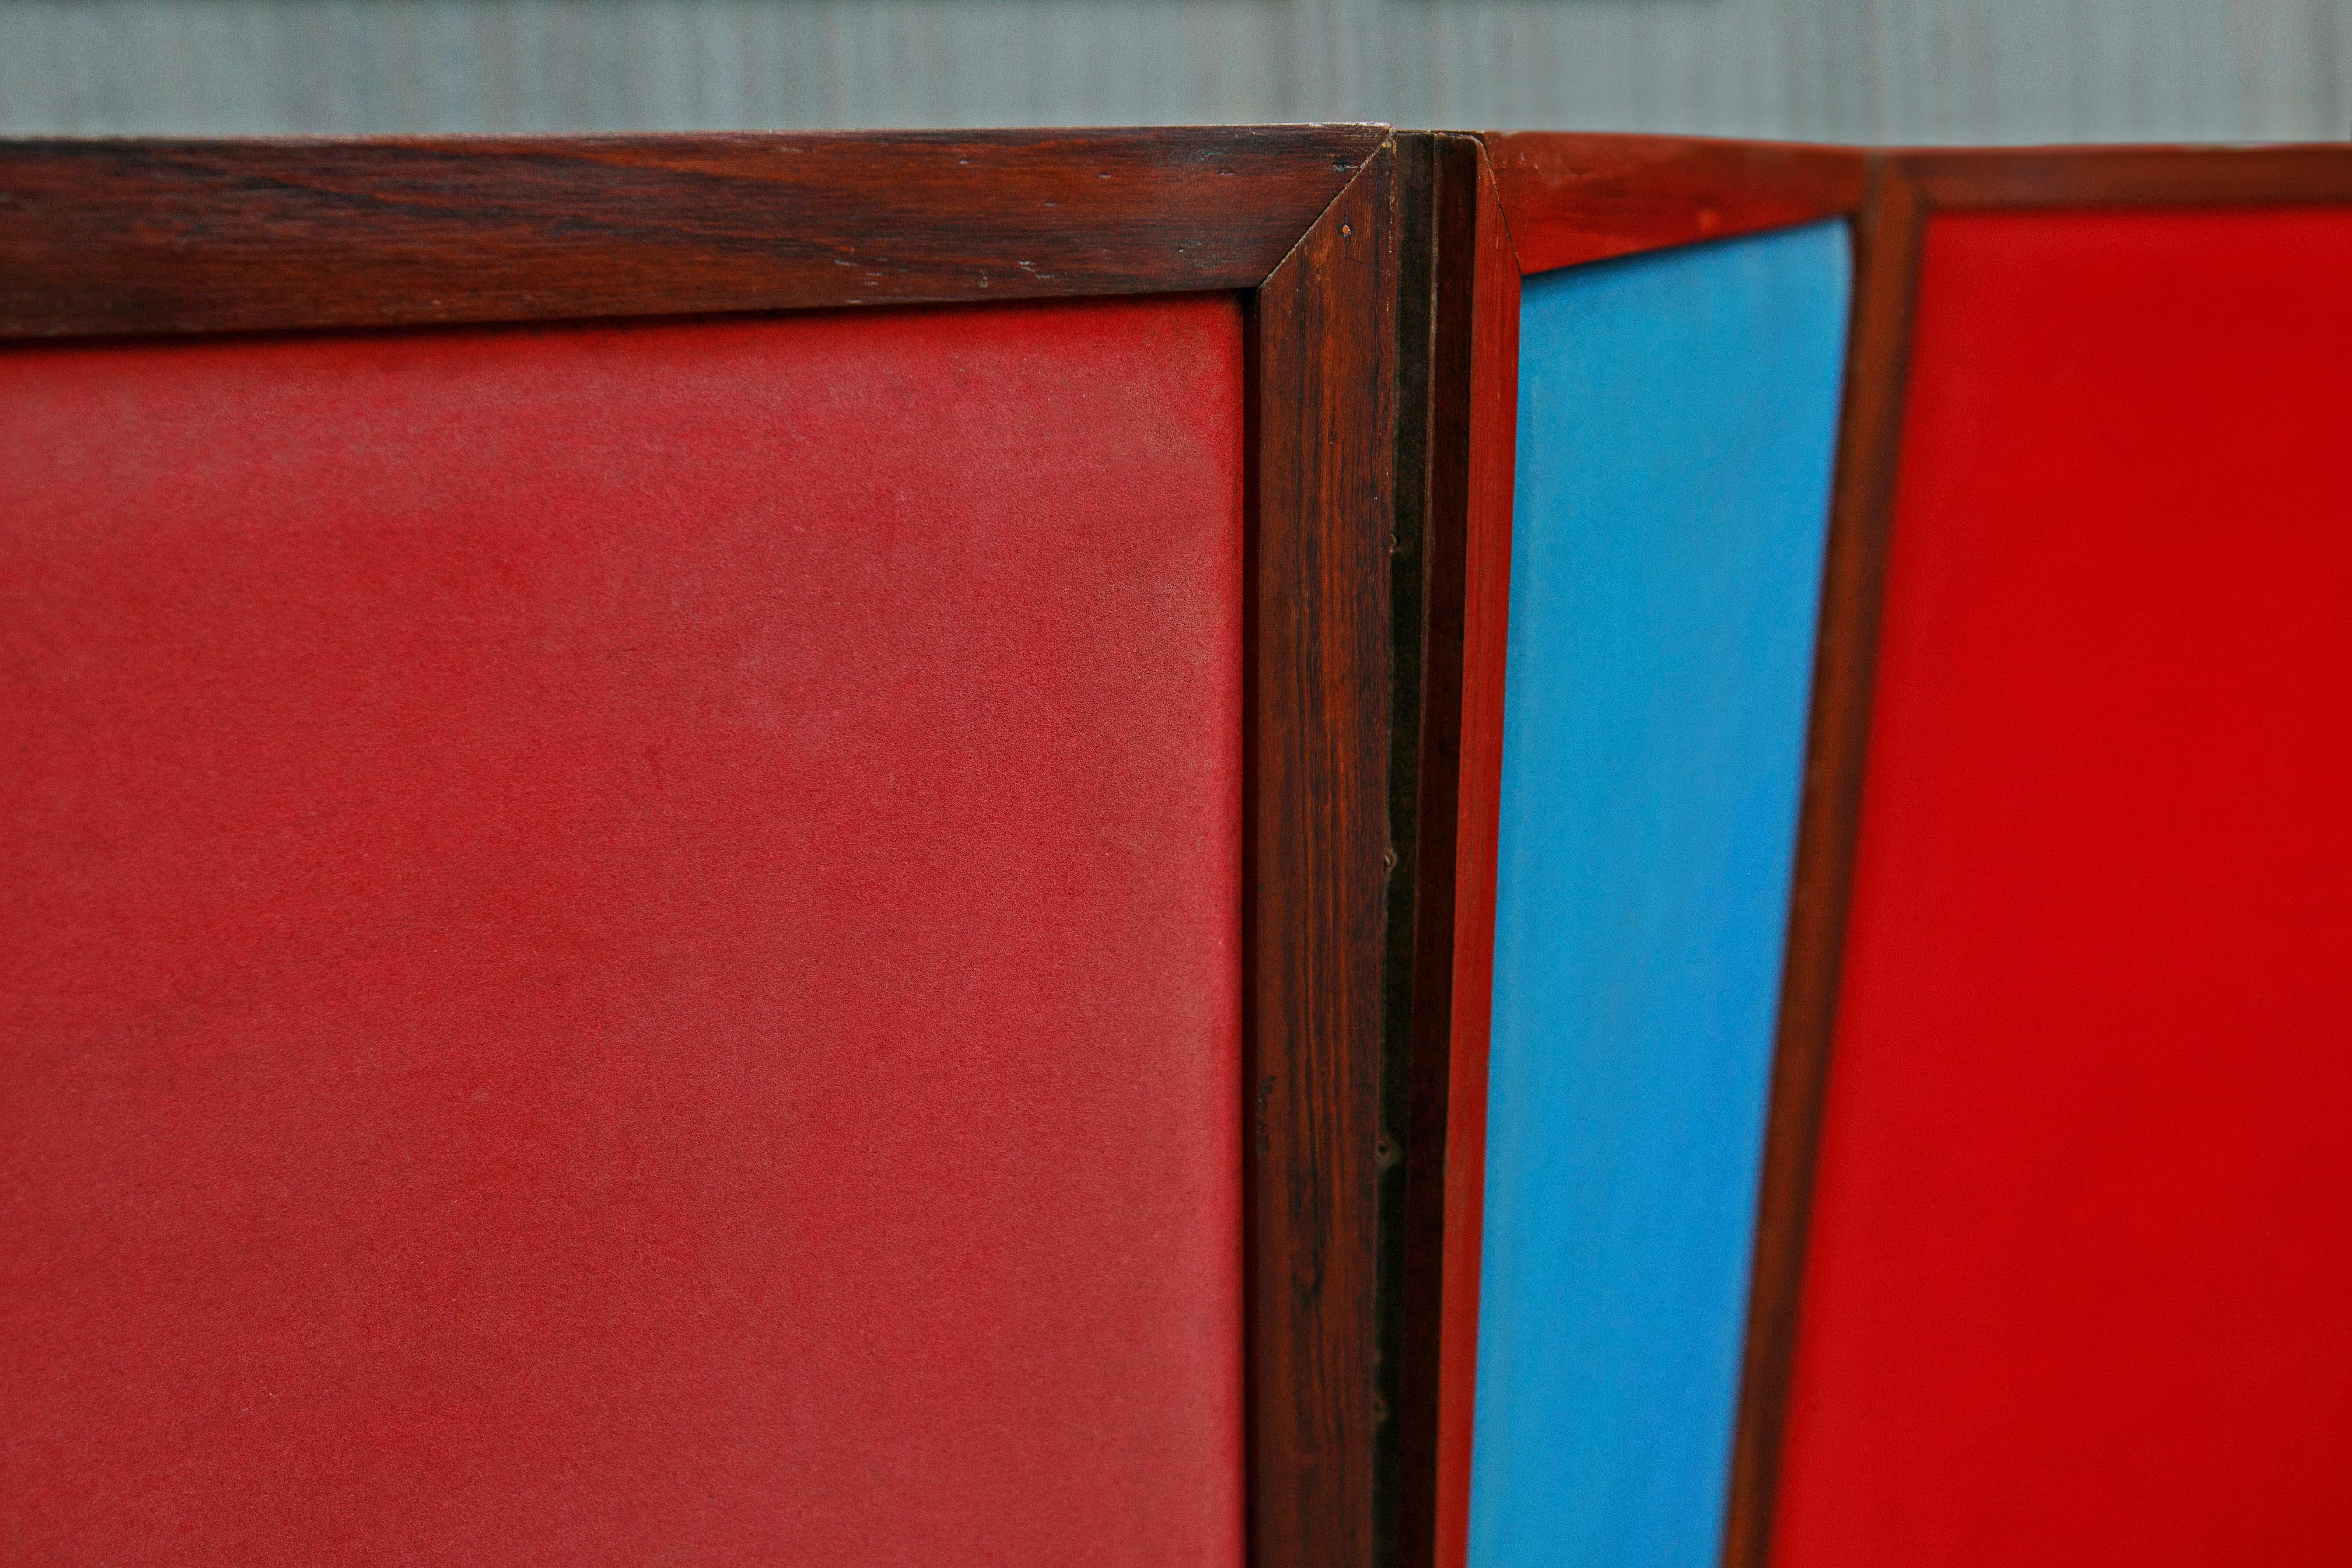 Brazilian Modern Room Divider in Hardwood & Leather by Sergio Rodrigues, 1960s For Sale 2